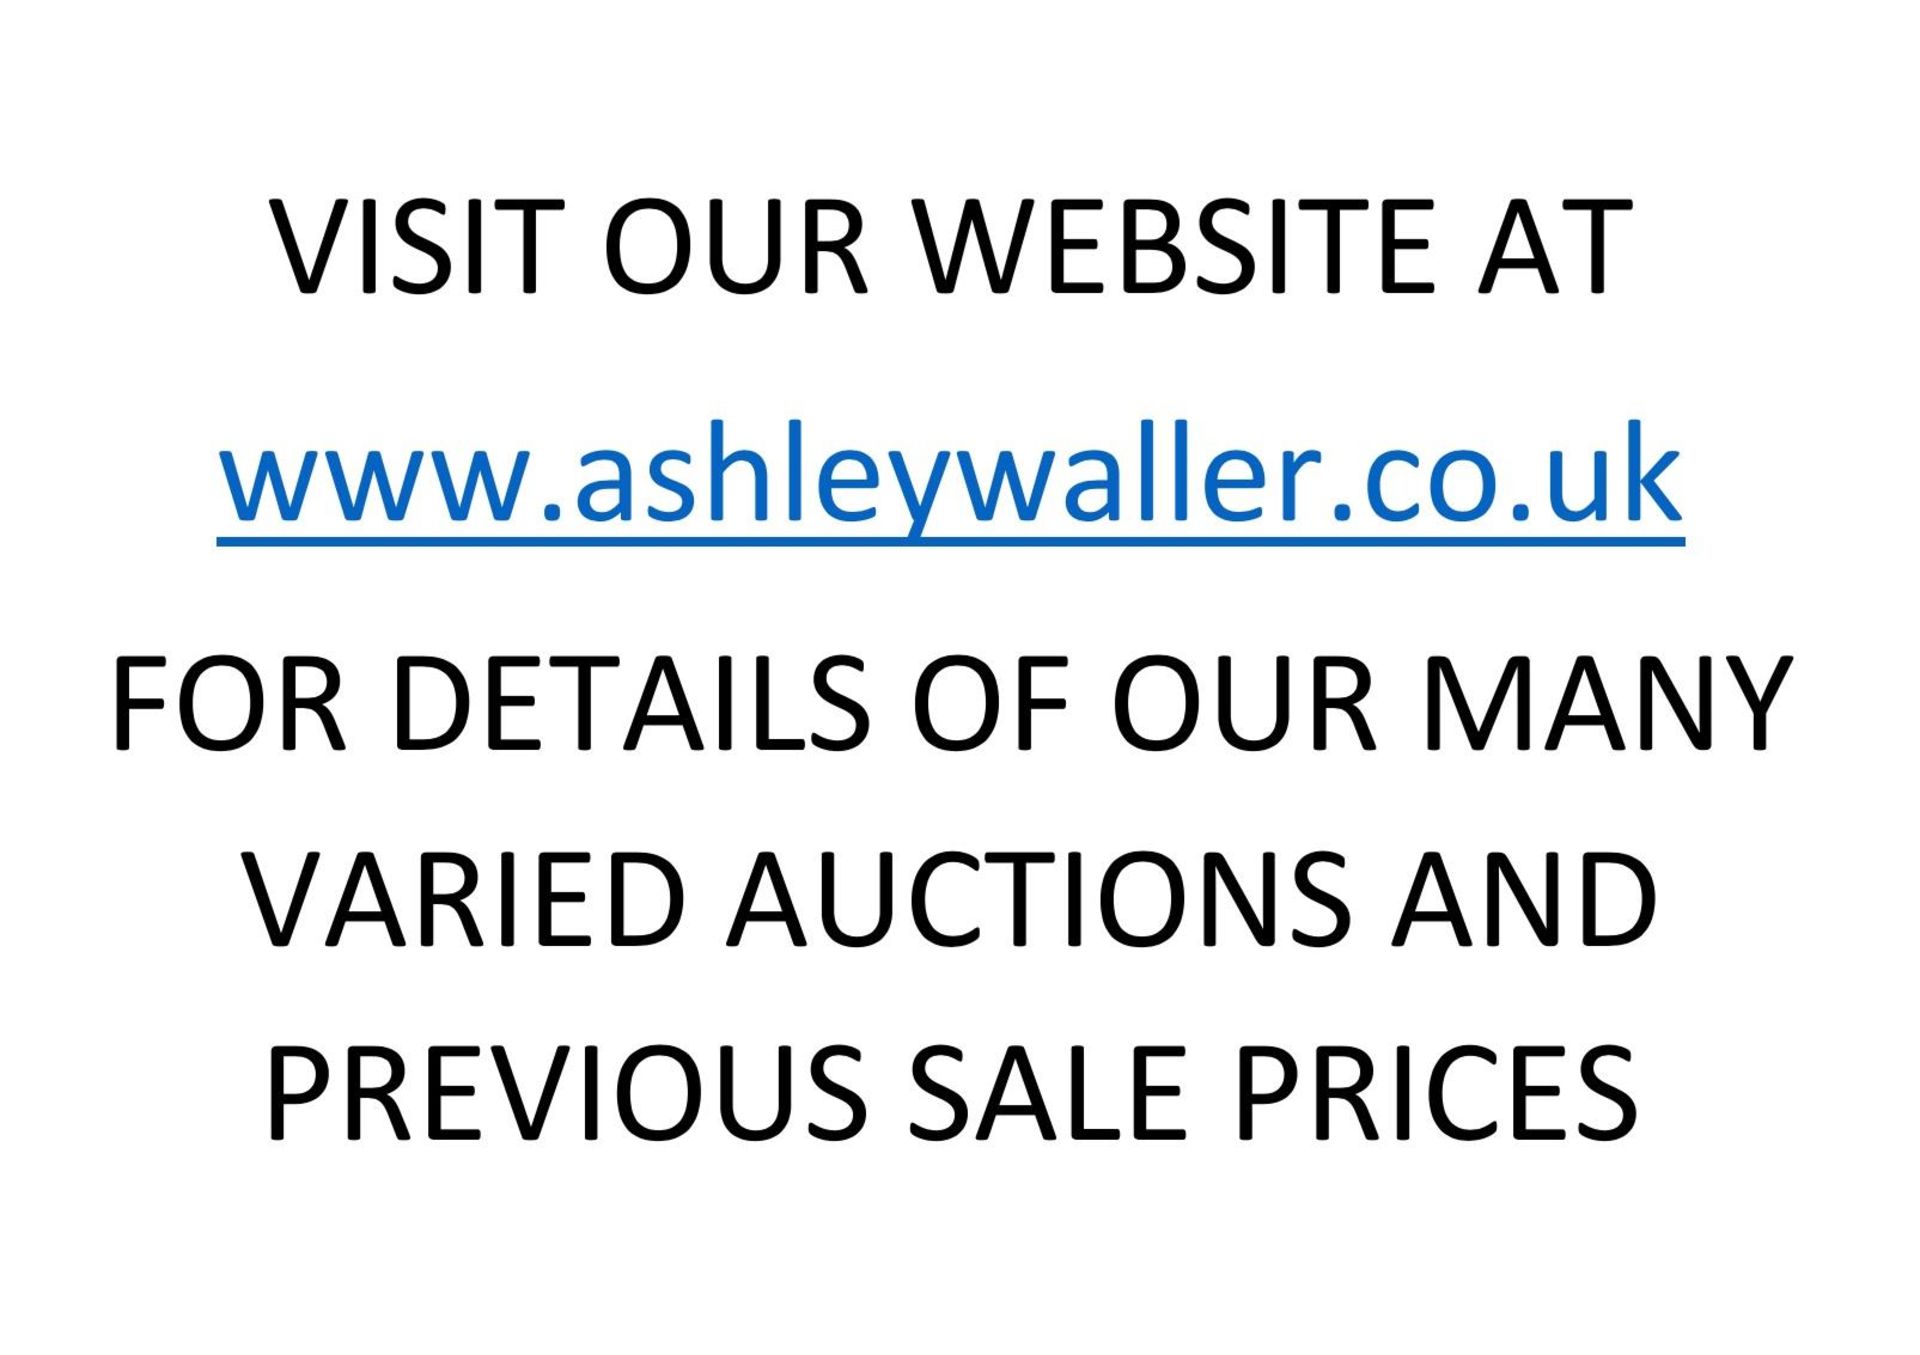 END OF SALE, THANK YOU FOR YOUR BIDDING. OUR NEXT SALE IS ON THE 24TH AND 25TH APRIL 2024